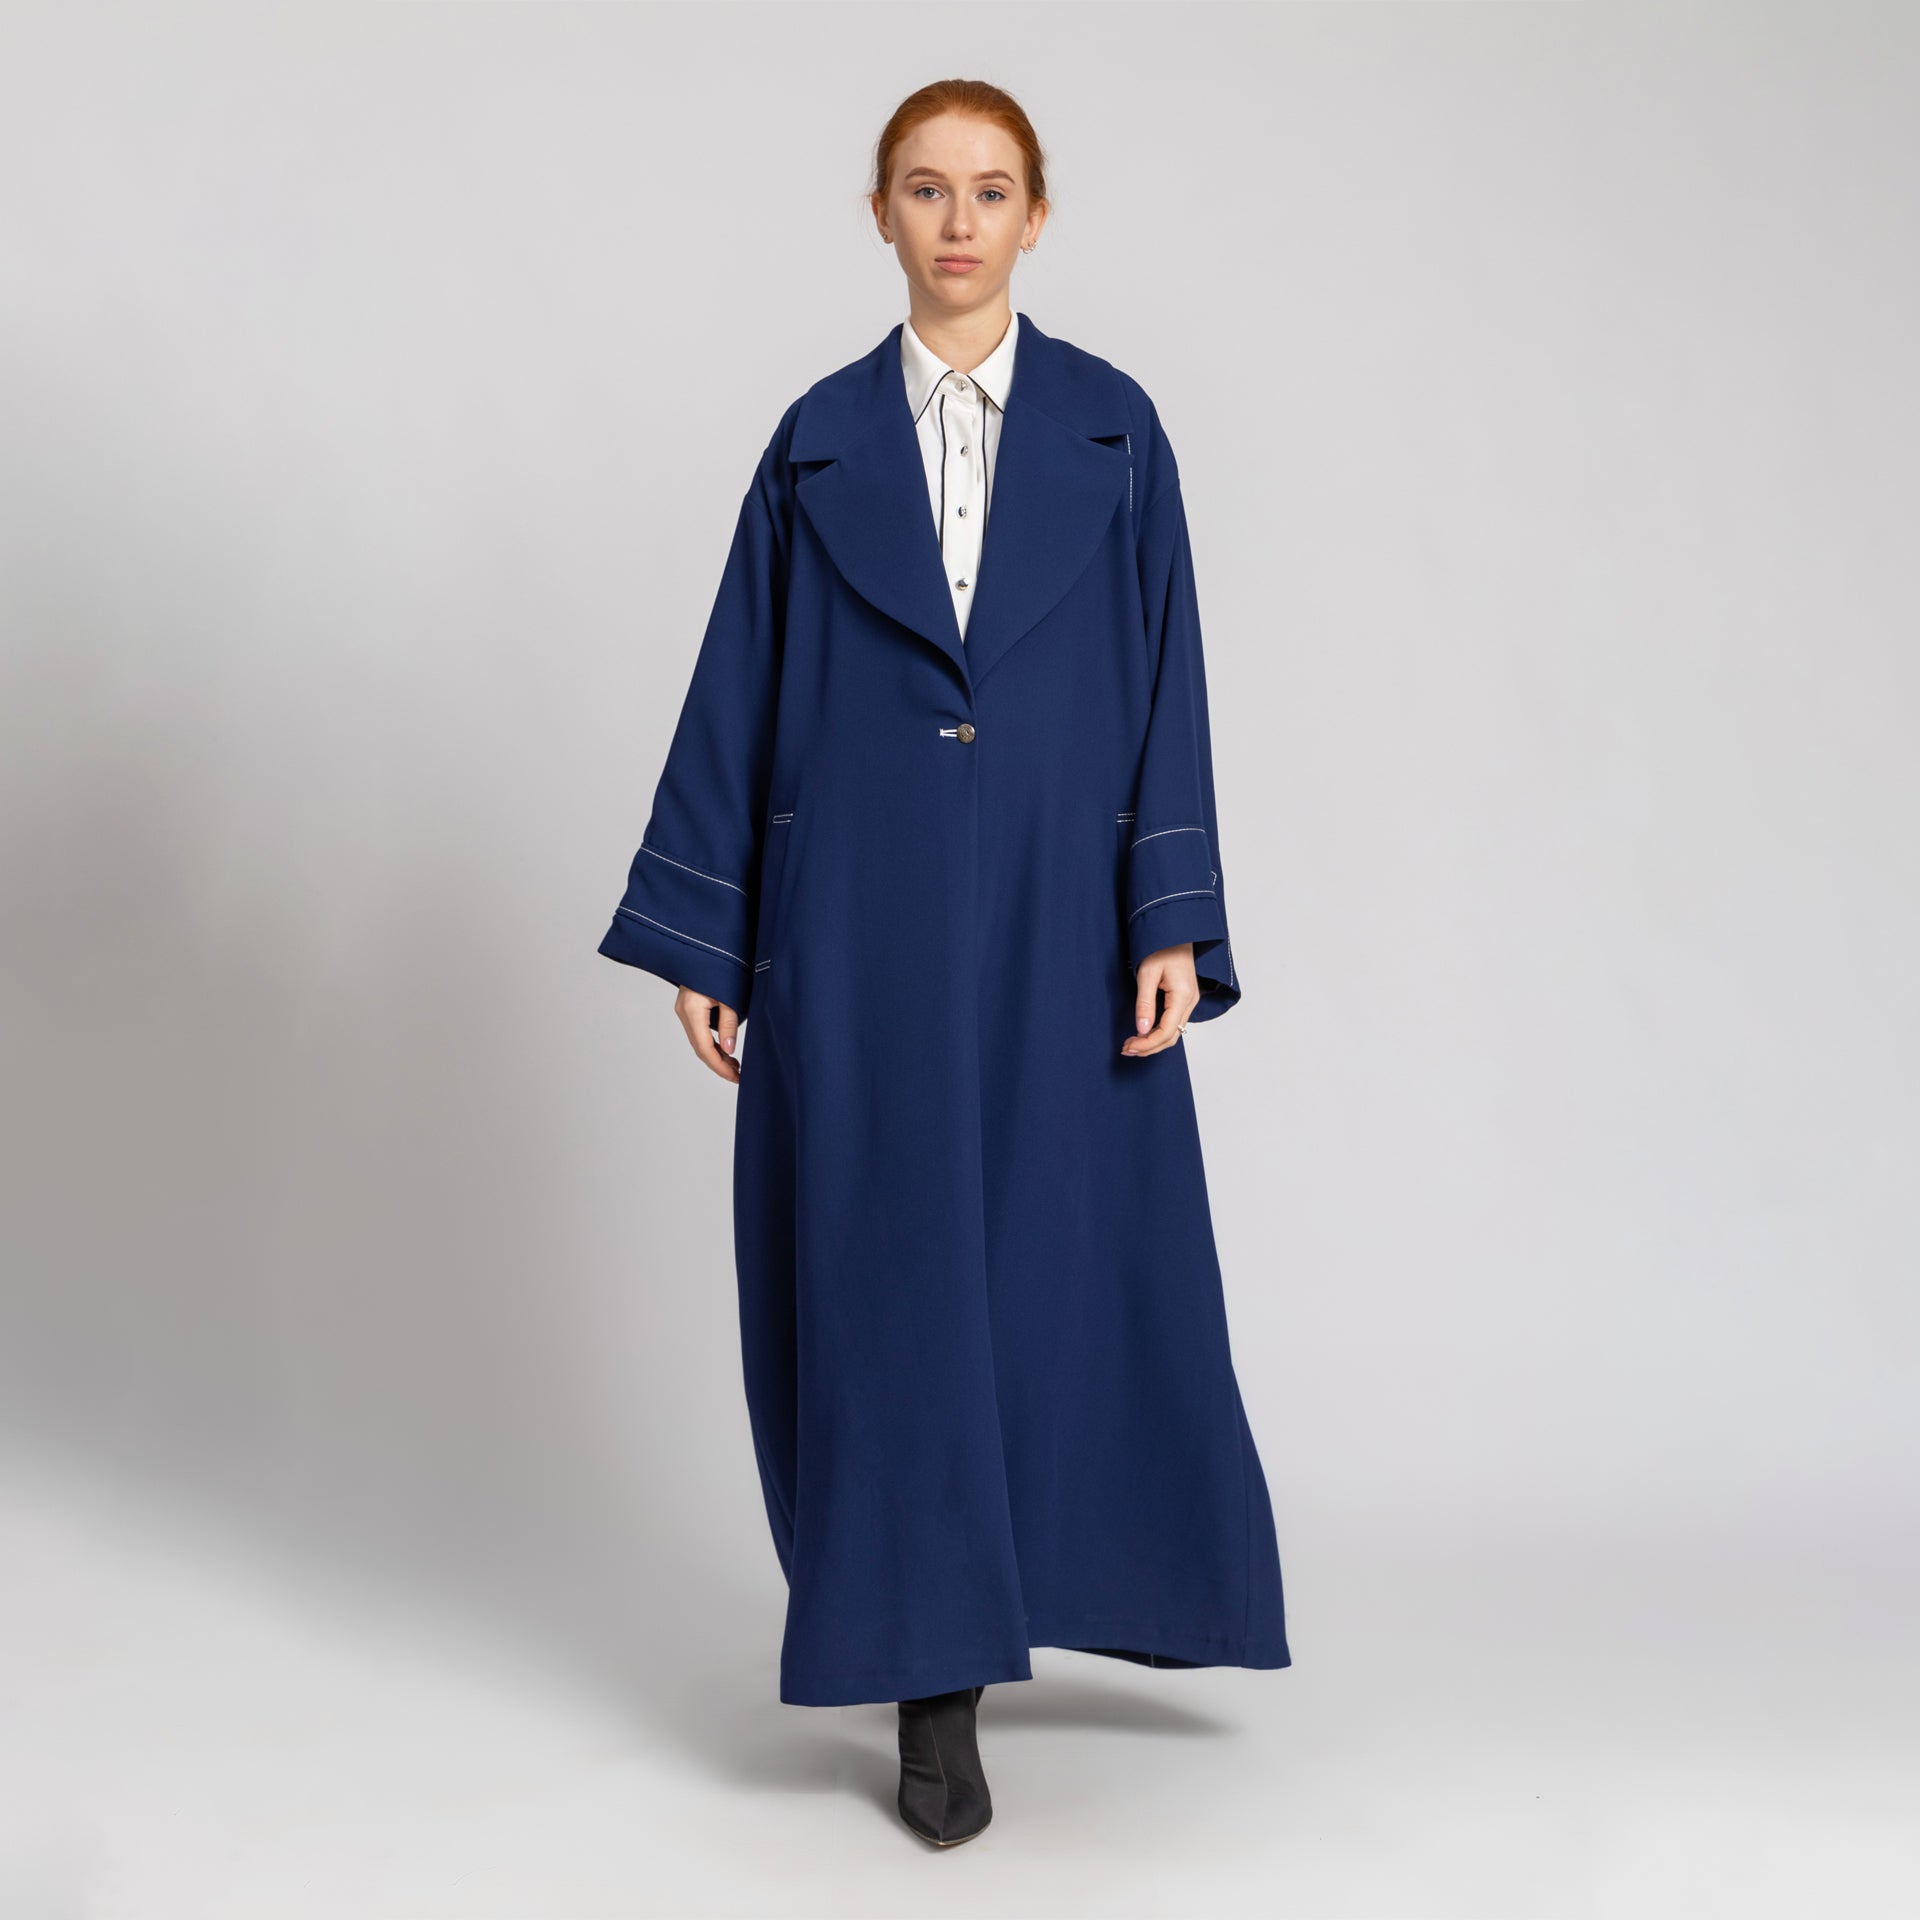 Navy Over-sized Crepe Abaya With Back Details From Elanove